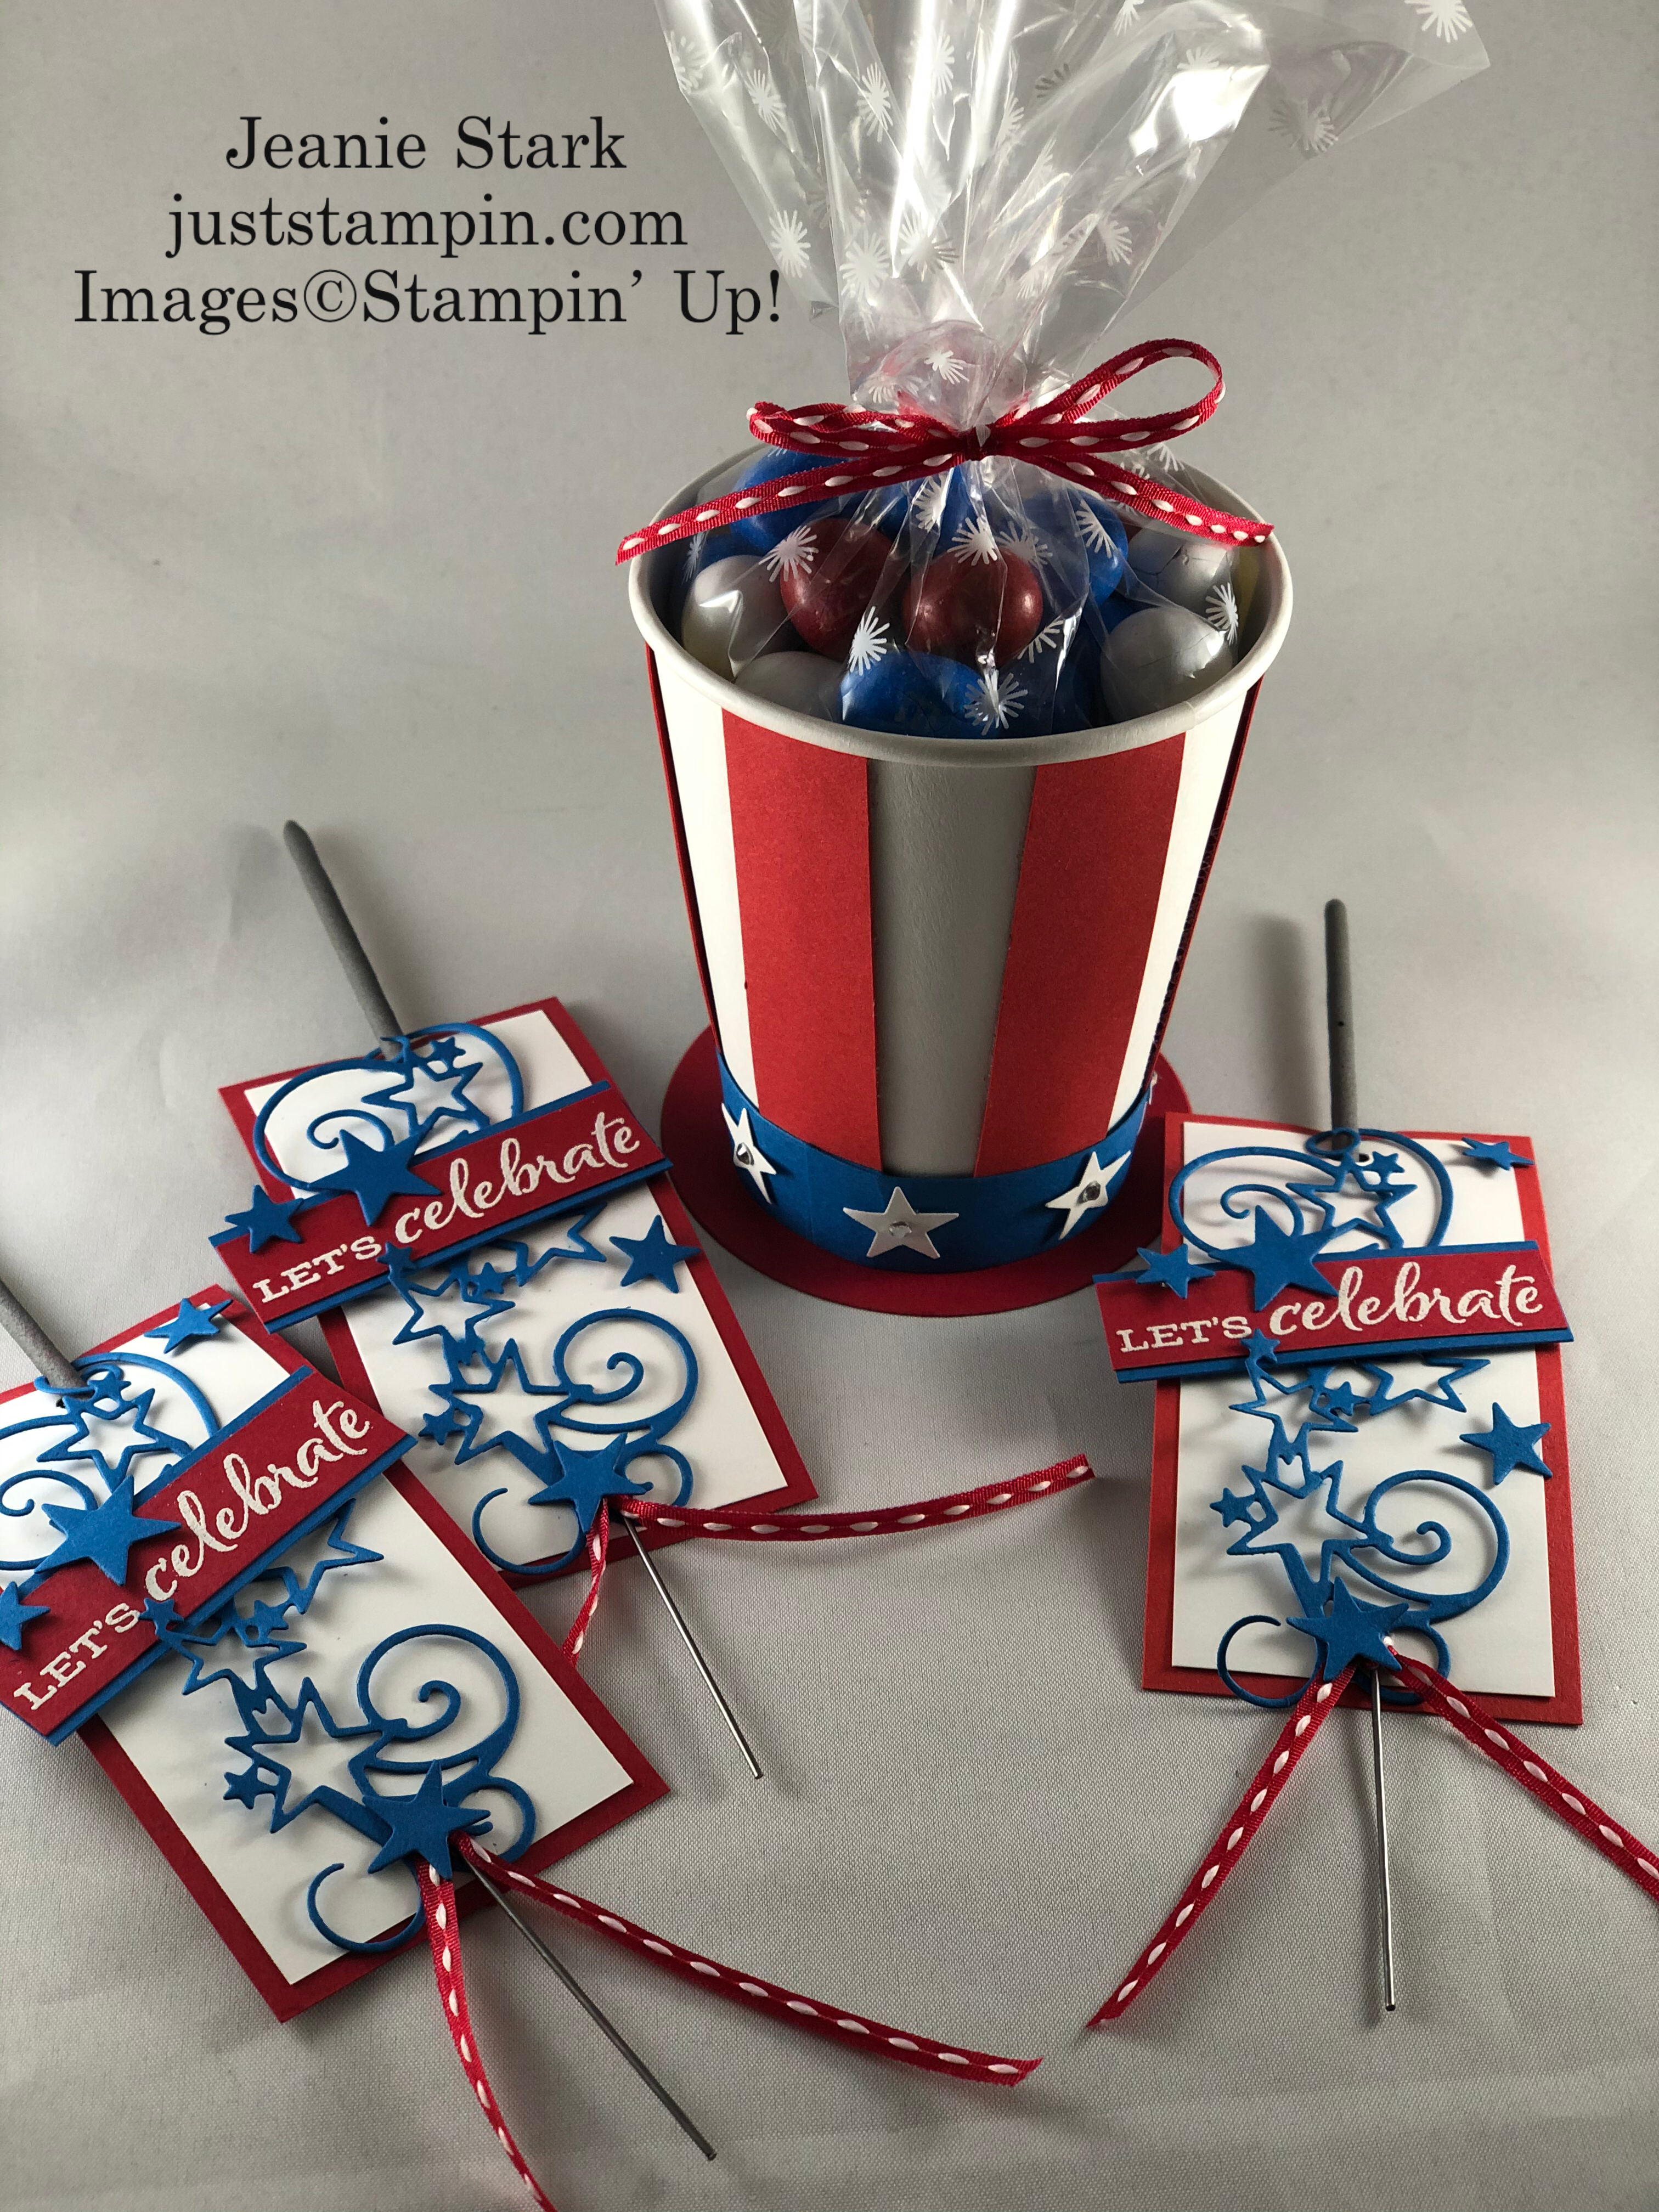 Stampin' Up! Celebrate Sunflowers and Stitched Stars table favors for 4th of July - Jeanie Stark StampinUp